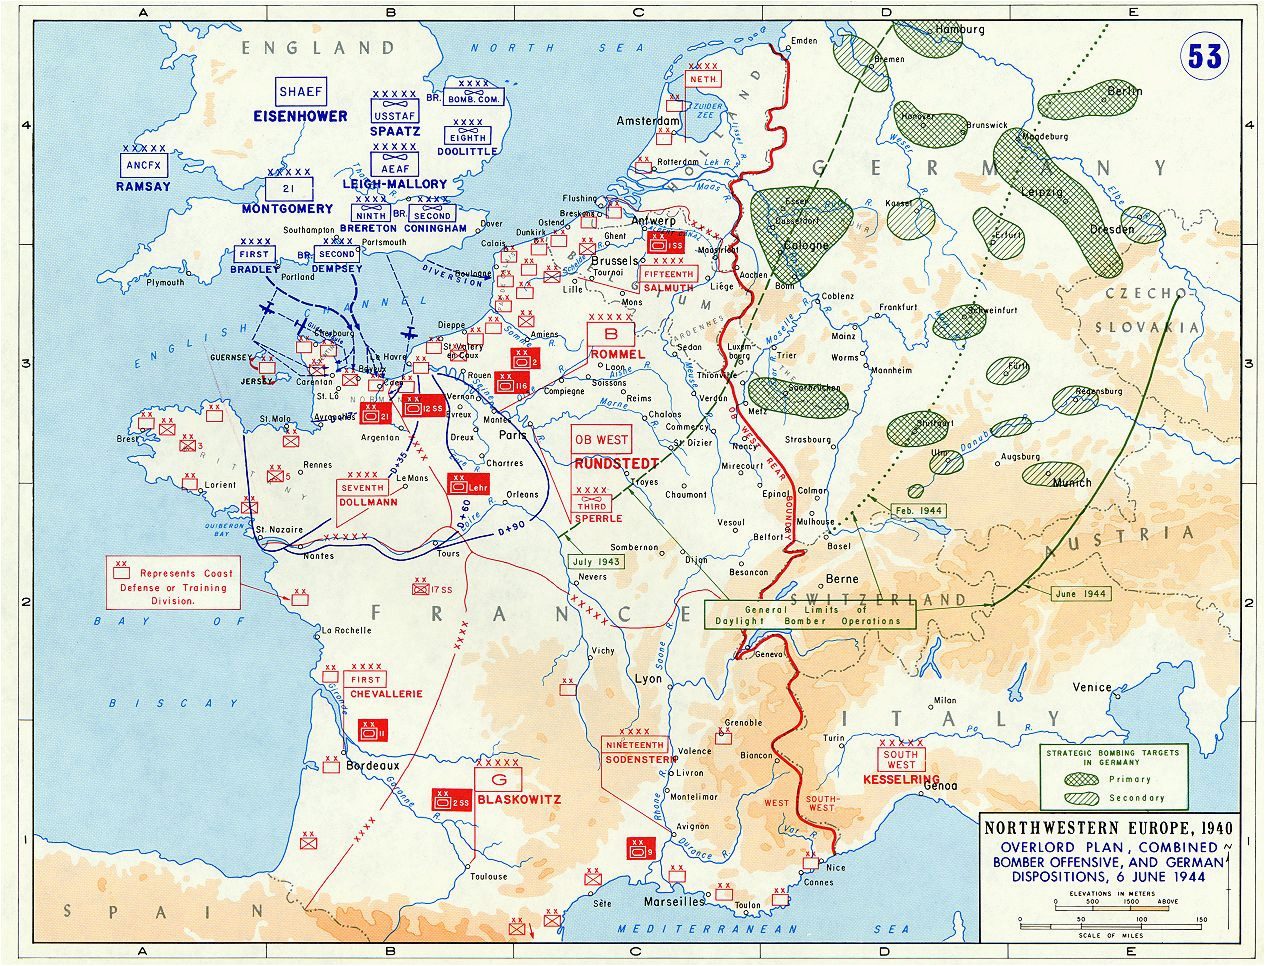 overlord plan combined bomber offensive and german dispositions 6